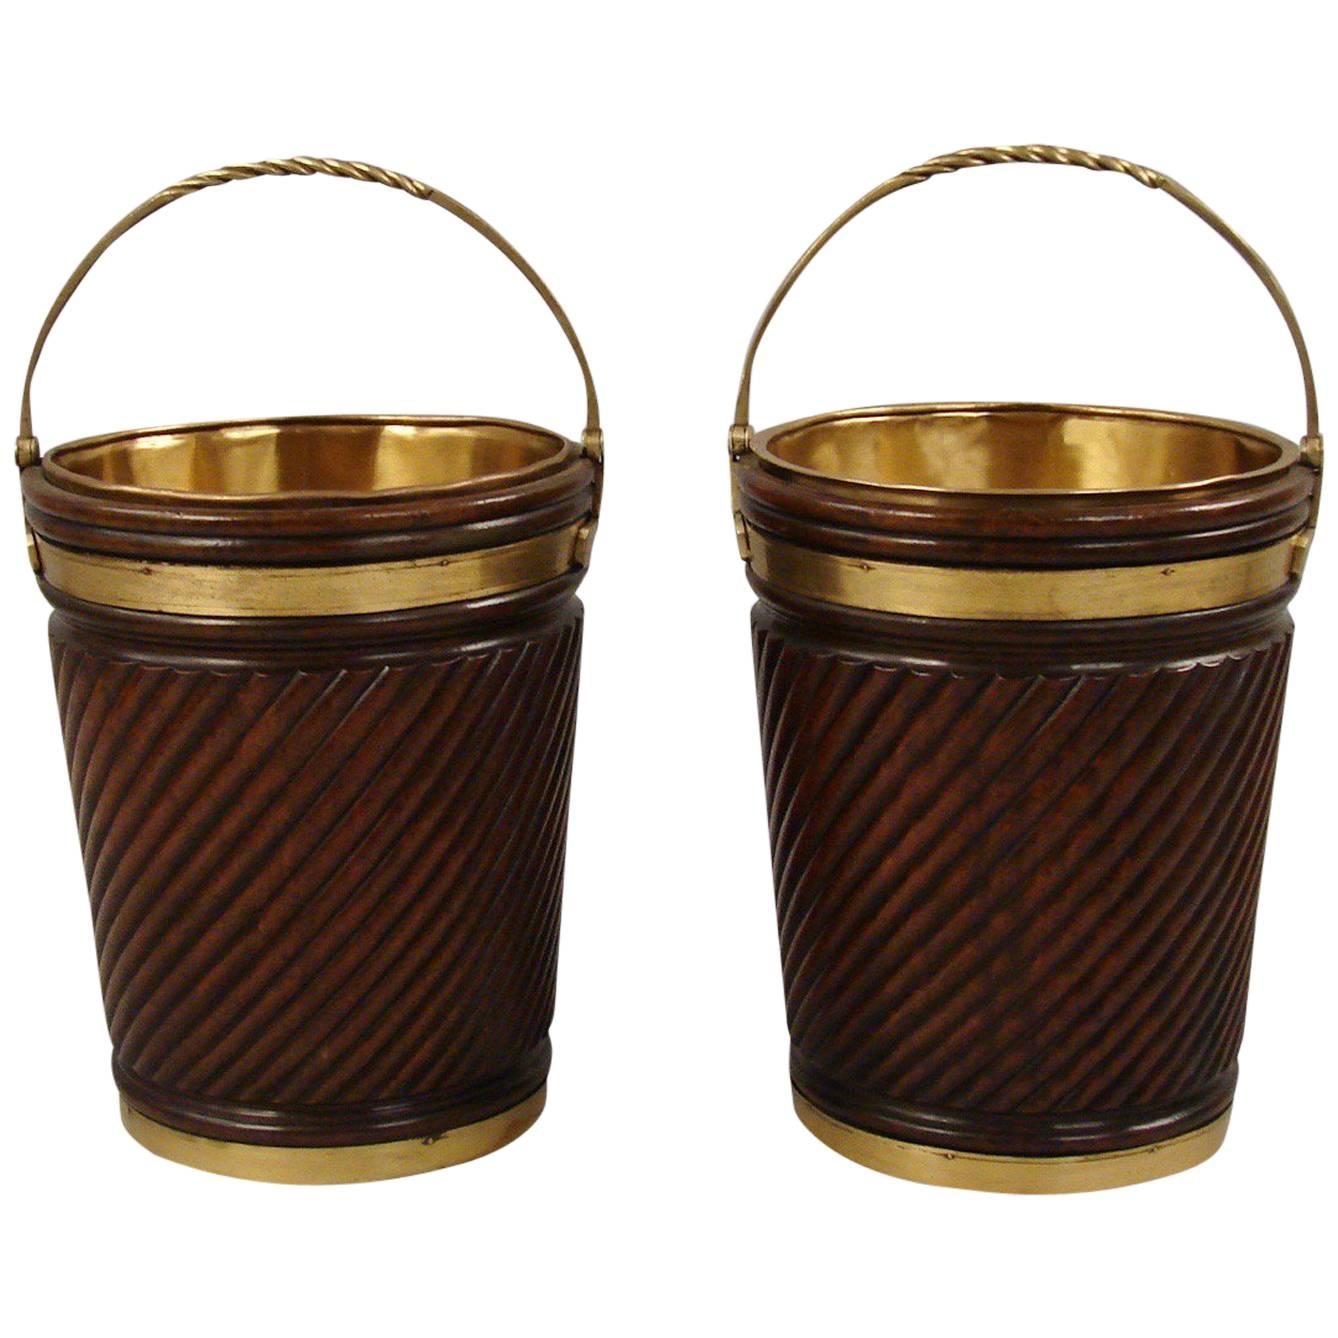 Pair of English Georgian Style Mahogany Peat Buckets with Liners